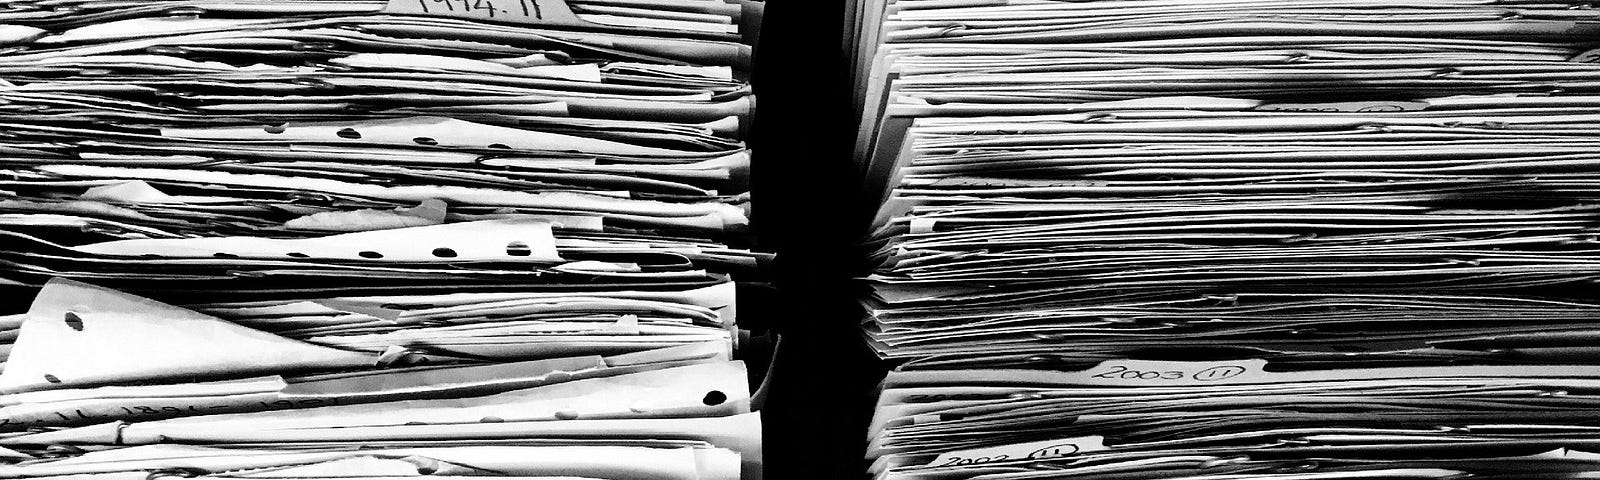 Two very large stacks of paper. Image by Ag Ku from Pixabay